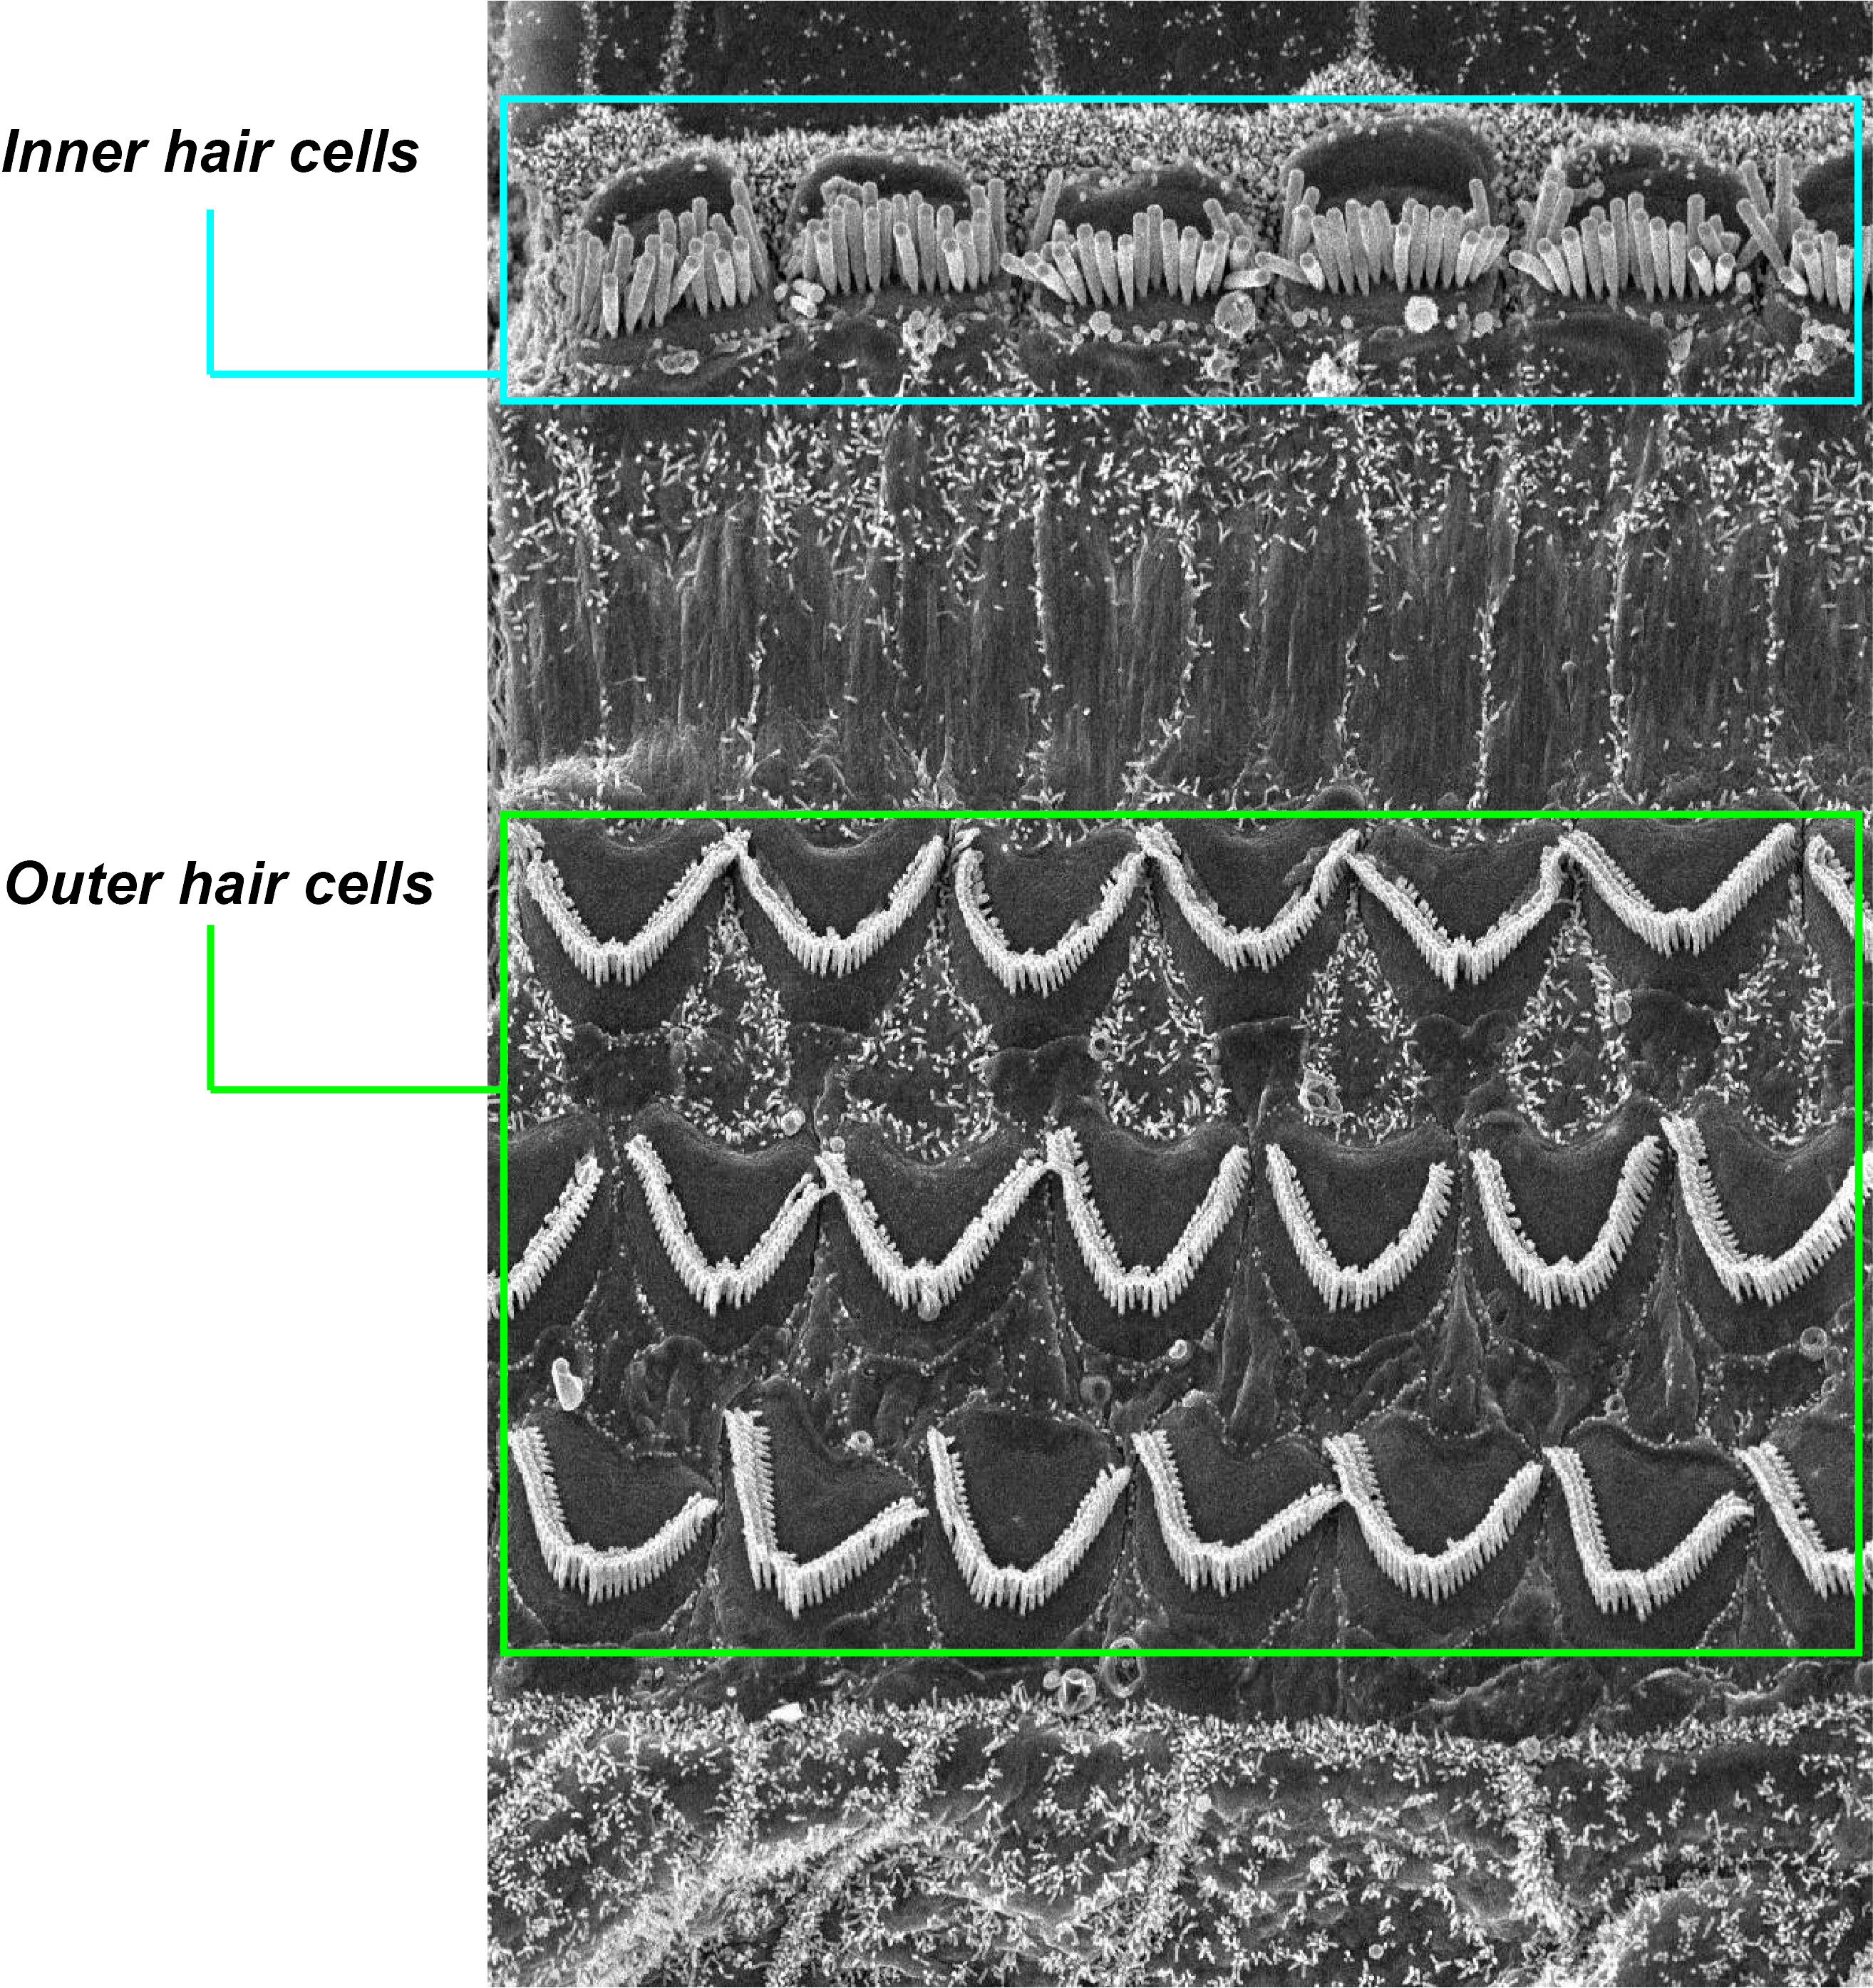 Inner and Outer Hair Cells